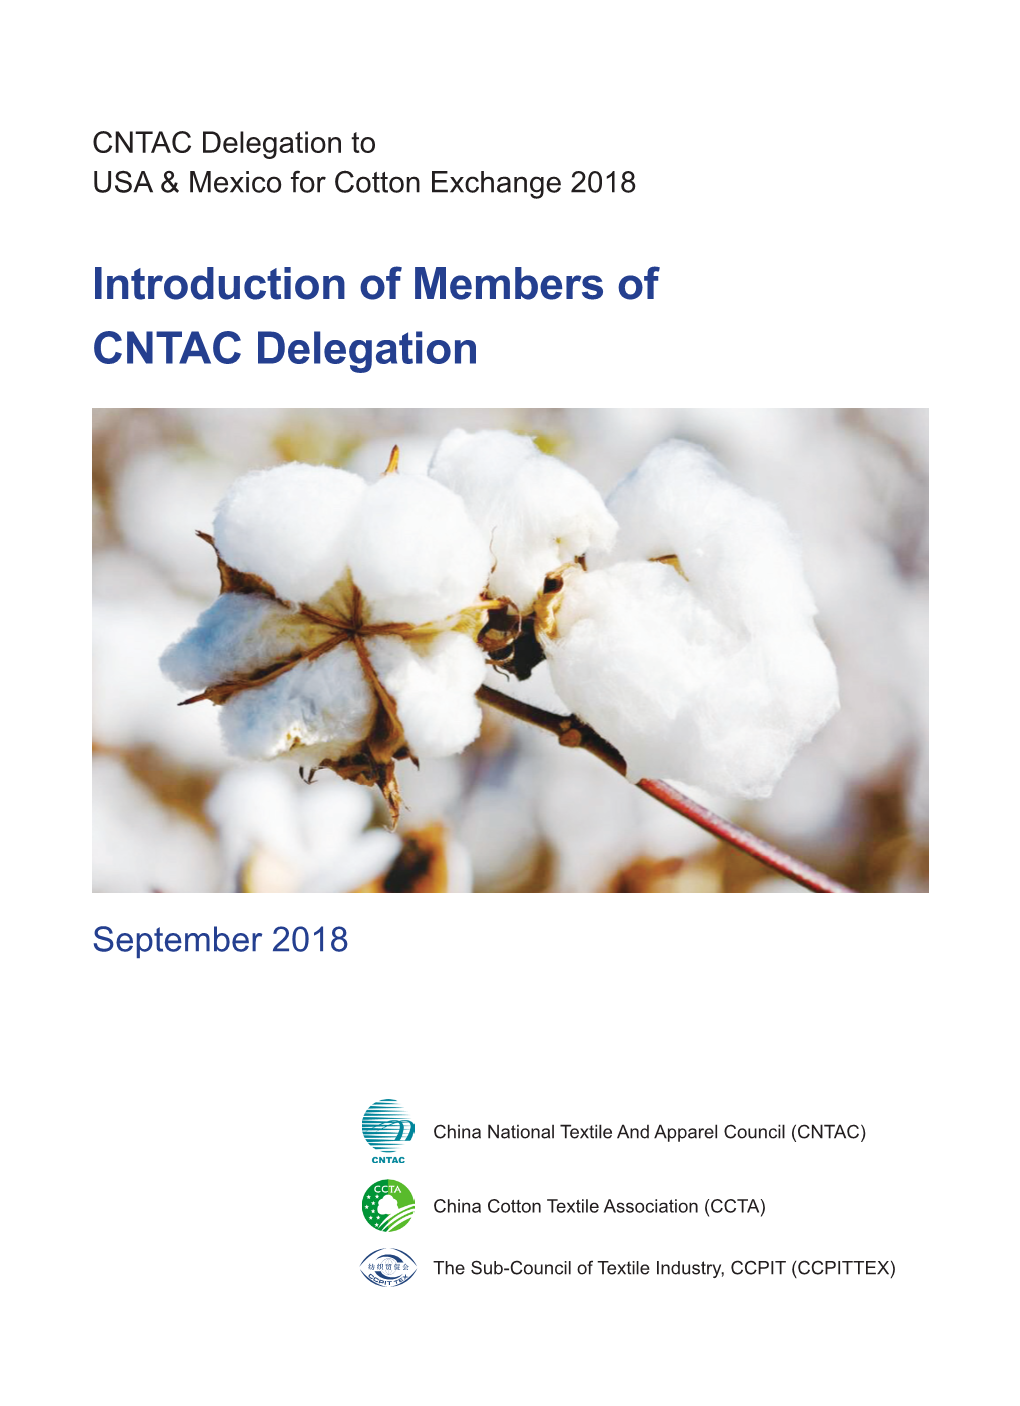 Introduction of Members of CNTAC Delegation